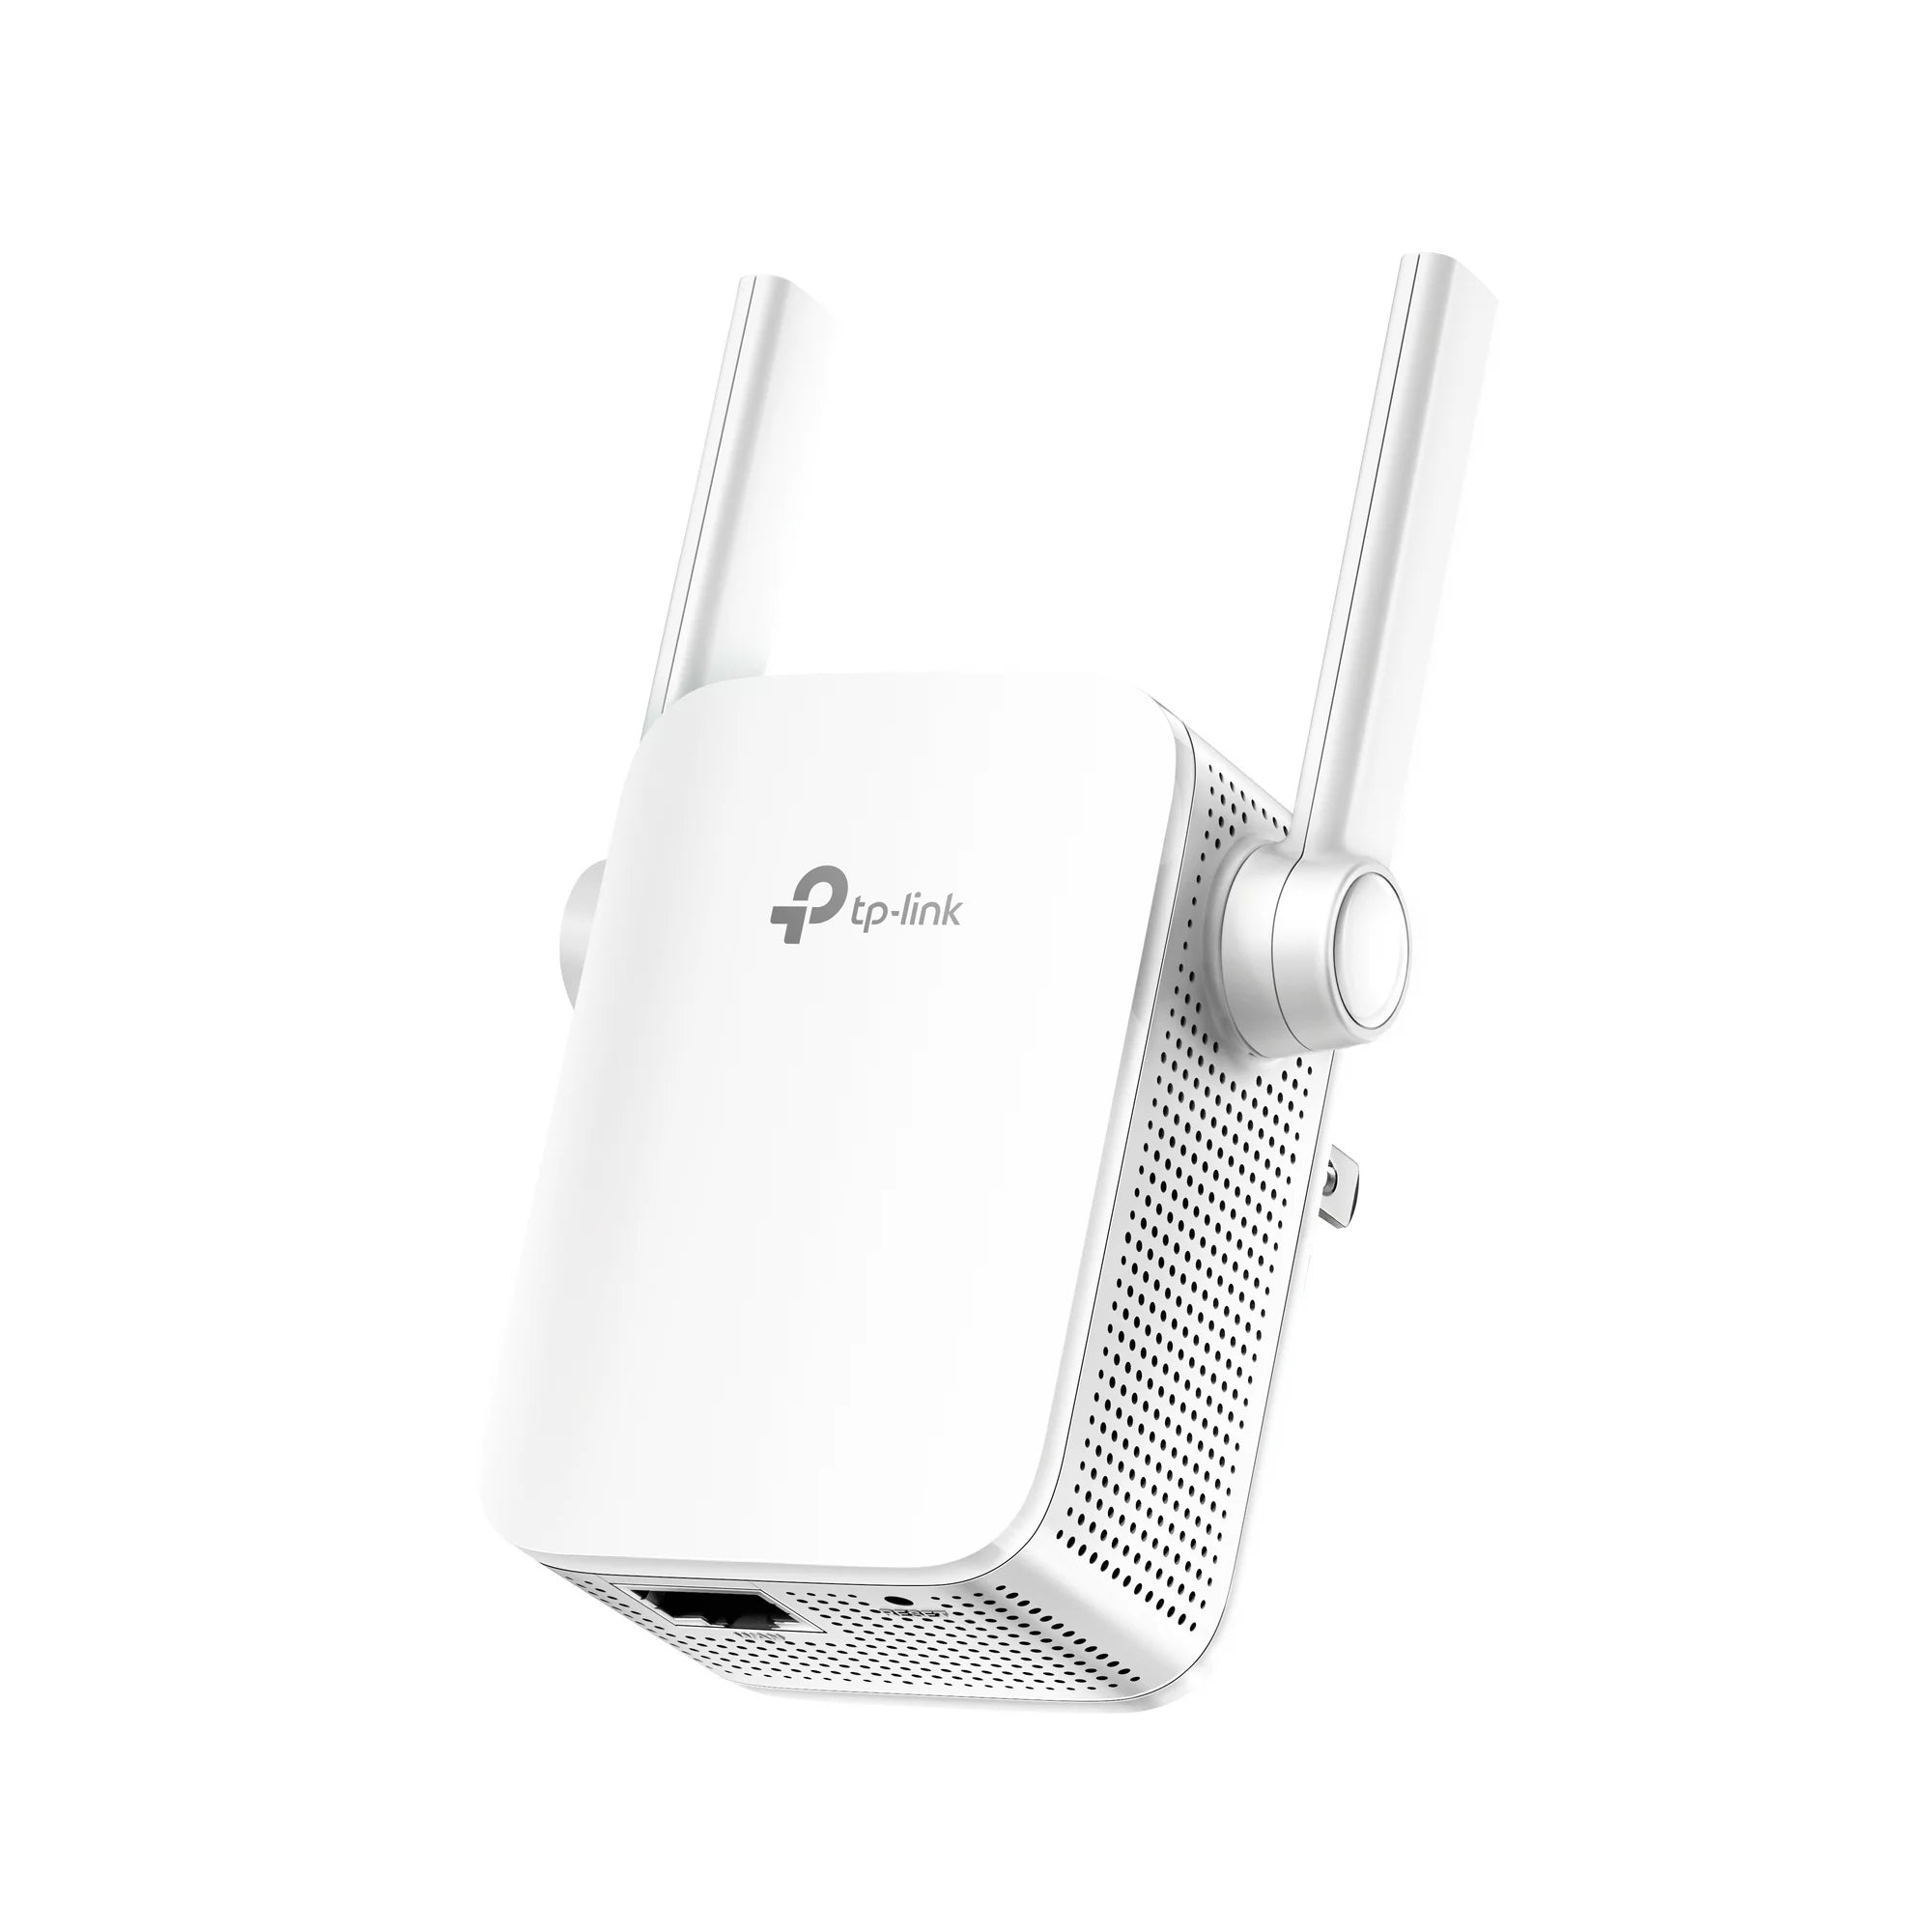 TP-Link | AC1200 WiFi Range Extender | Up to 1200Mbps | Dual Band WiFi Extender, Repeater, Wifi Signal Booster, Access Point (RE305)